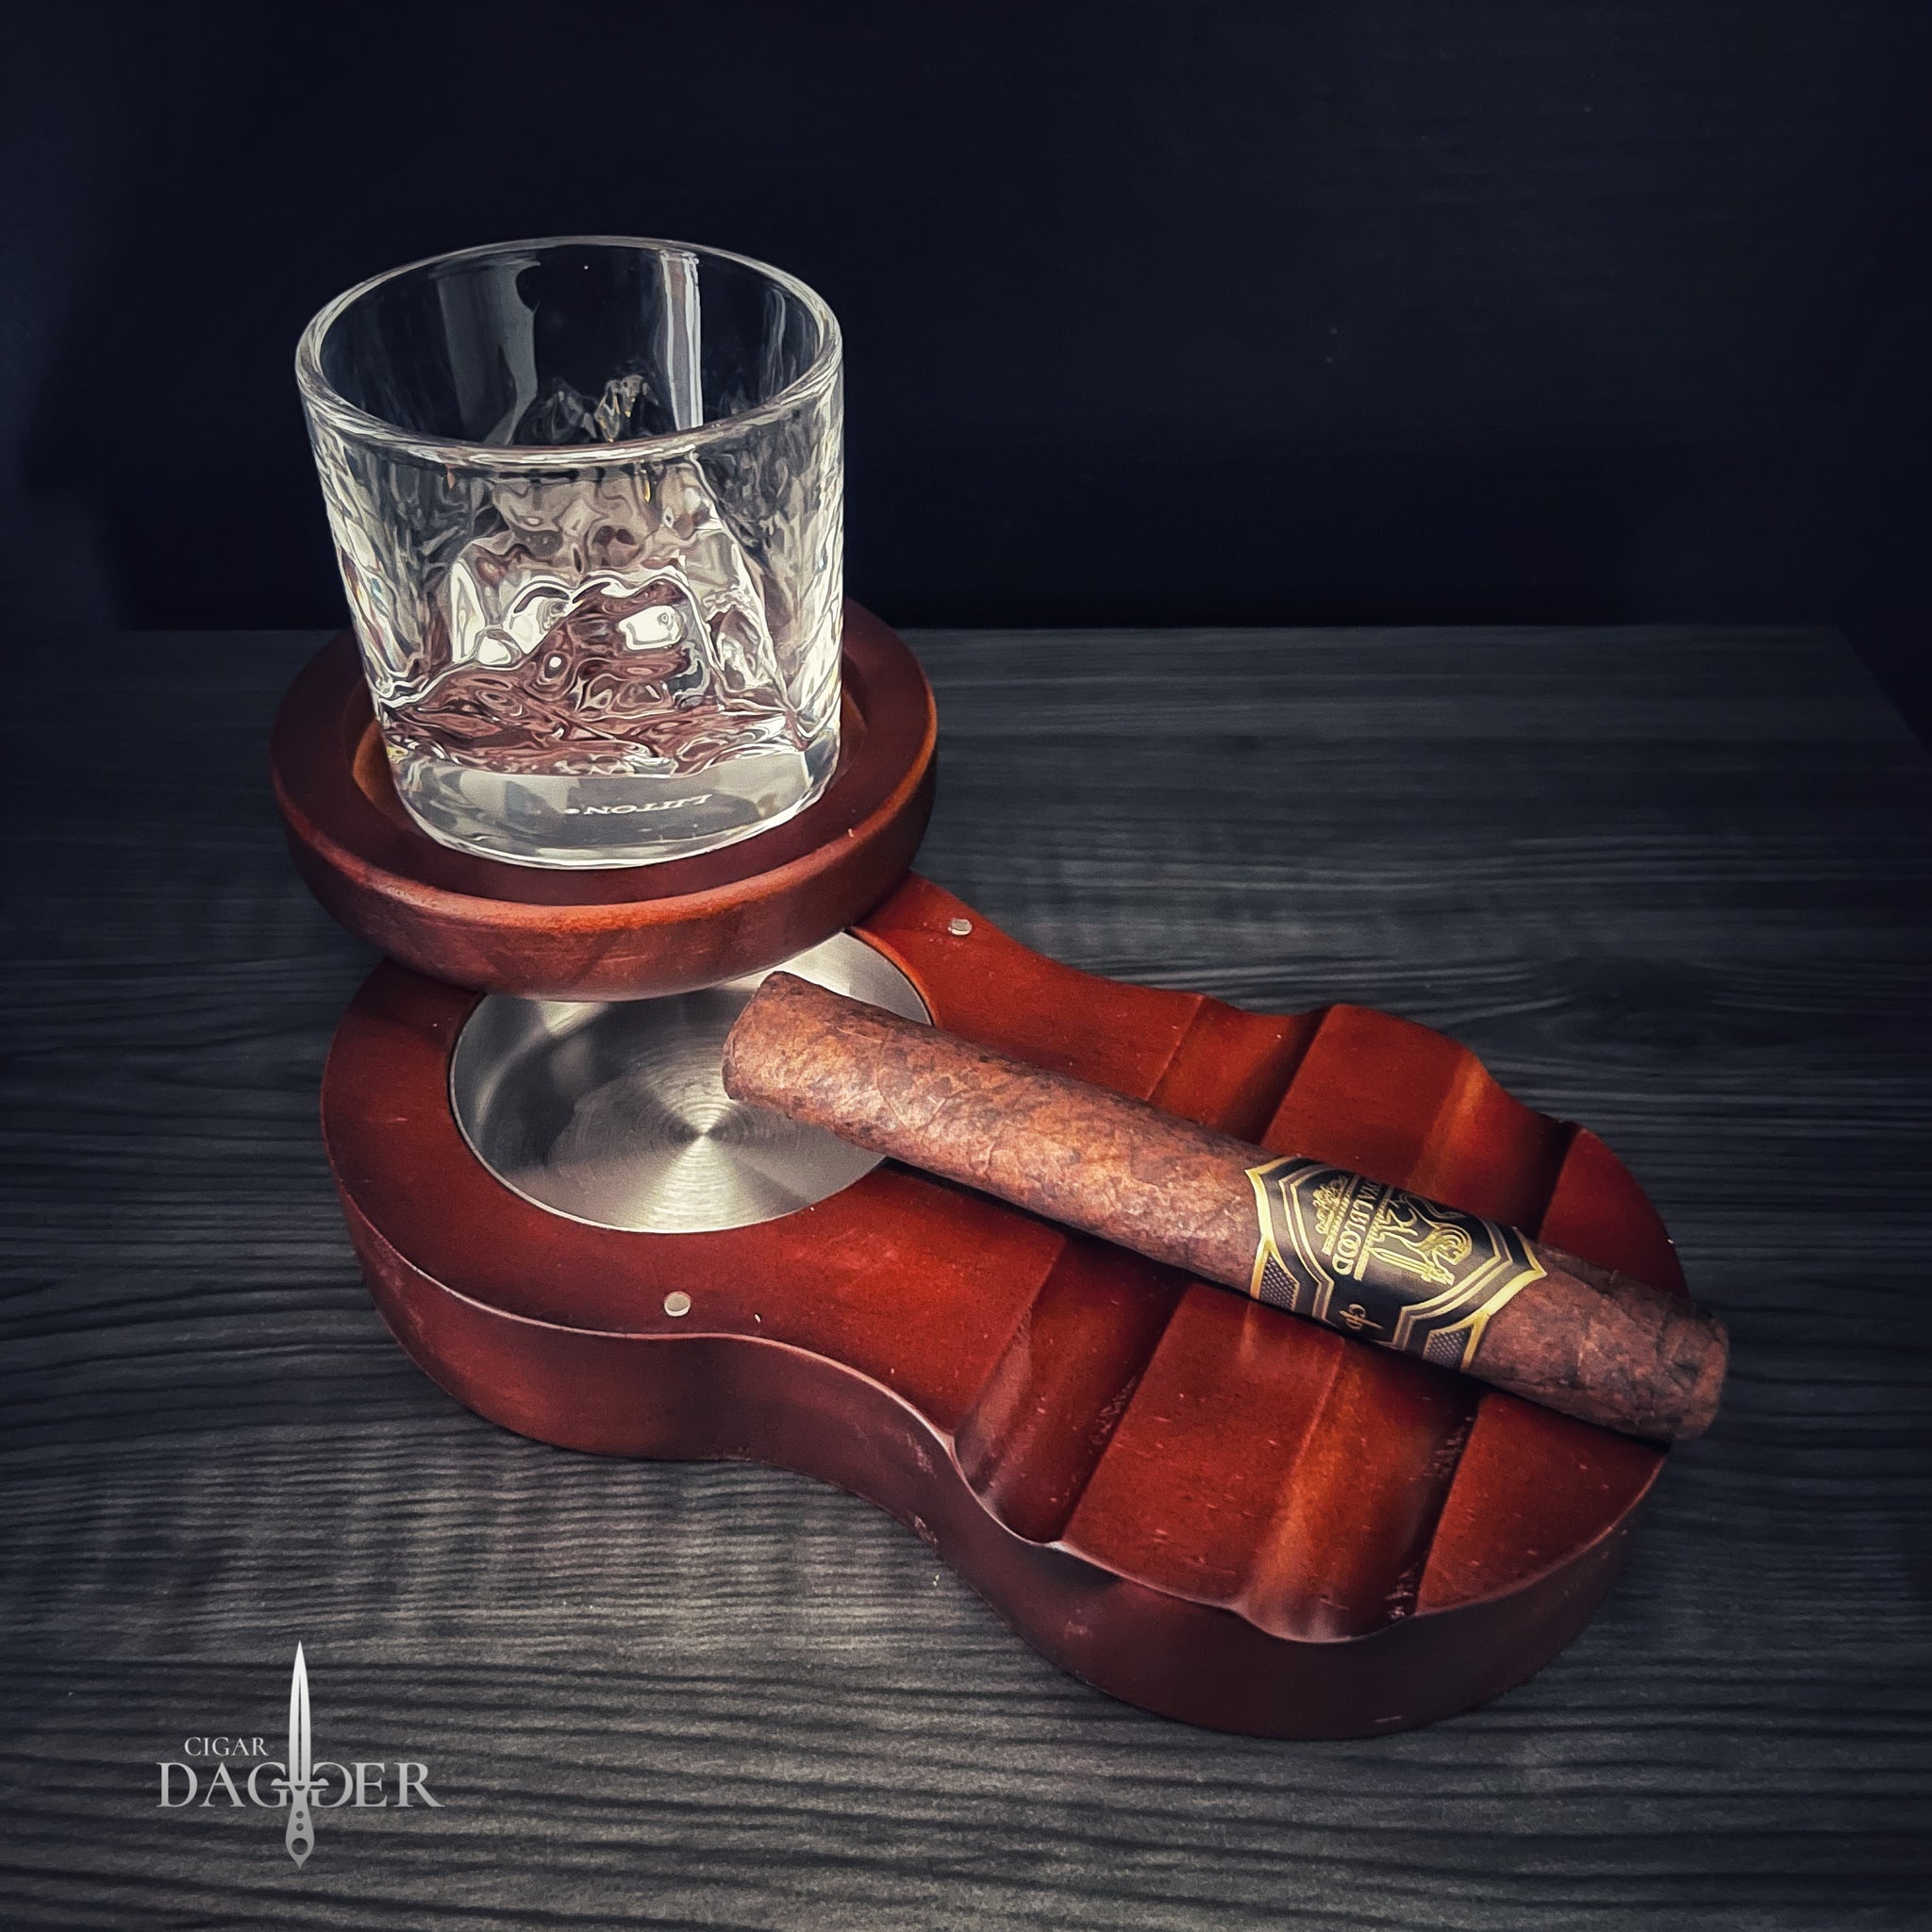 The Whiskey and Cigar Tray - Ashtray, Rest and Coaster – Cigar Dagger